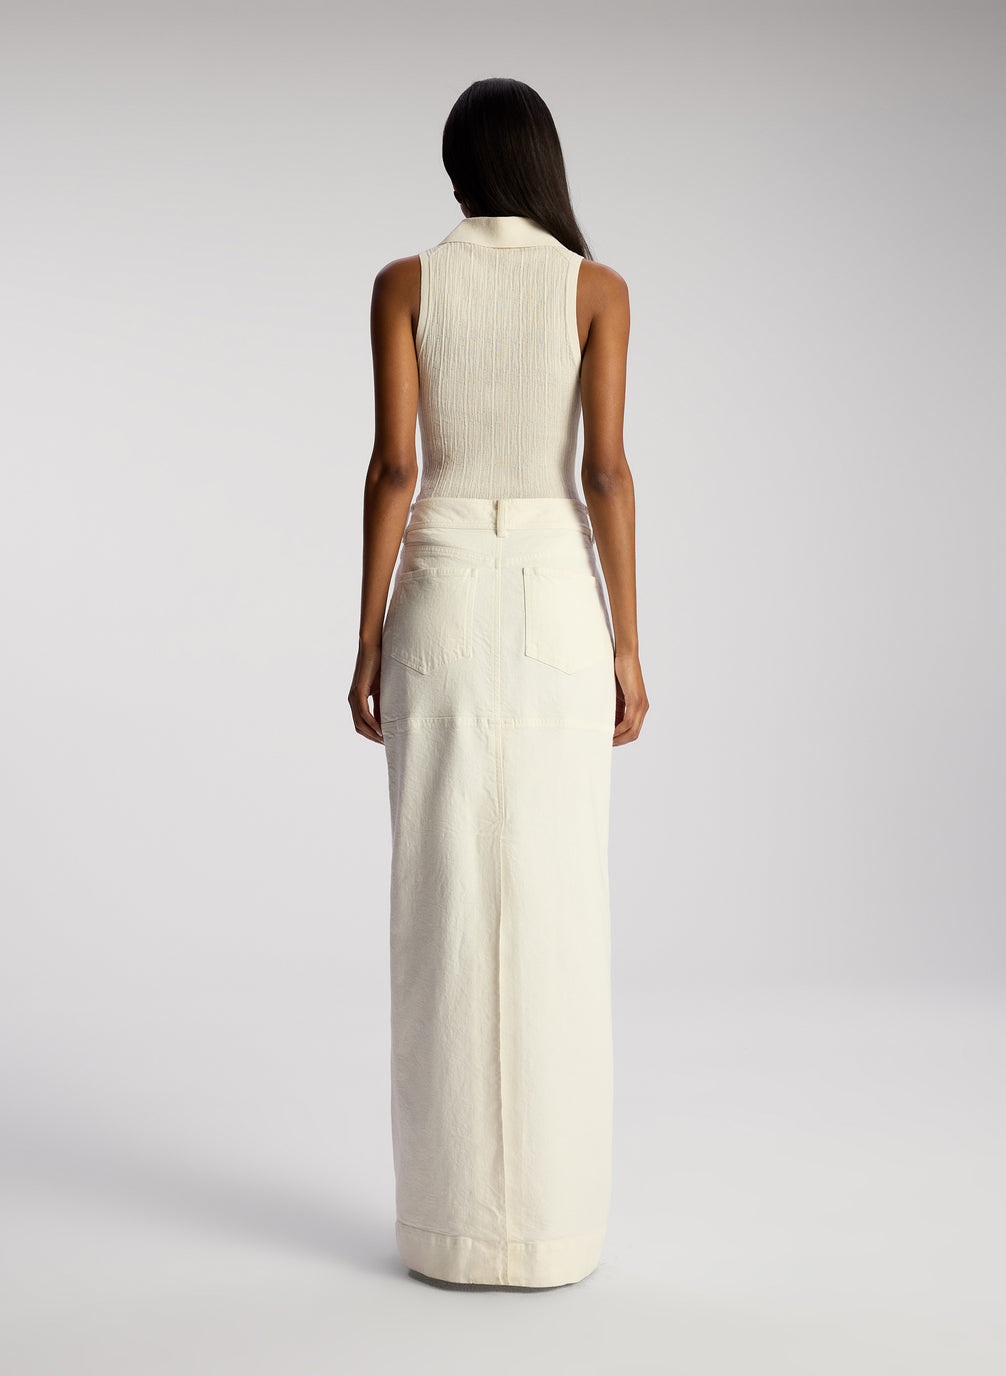 back view of woman wearing white sleeveless collared shirt and whit maxi skirt